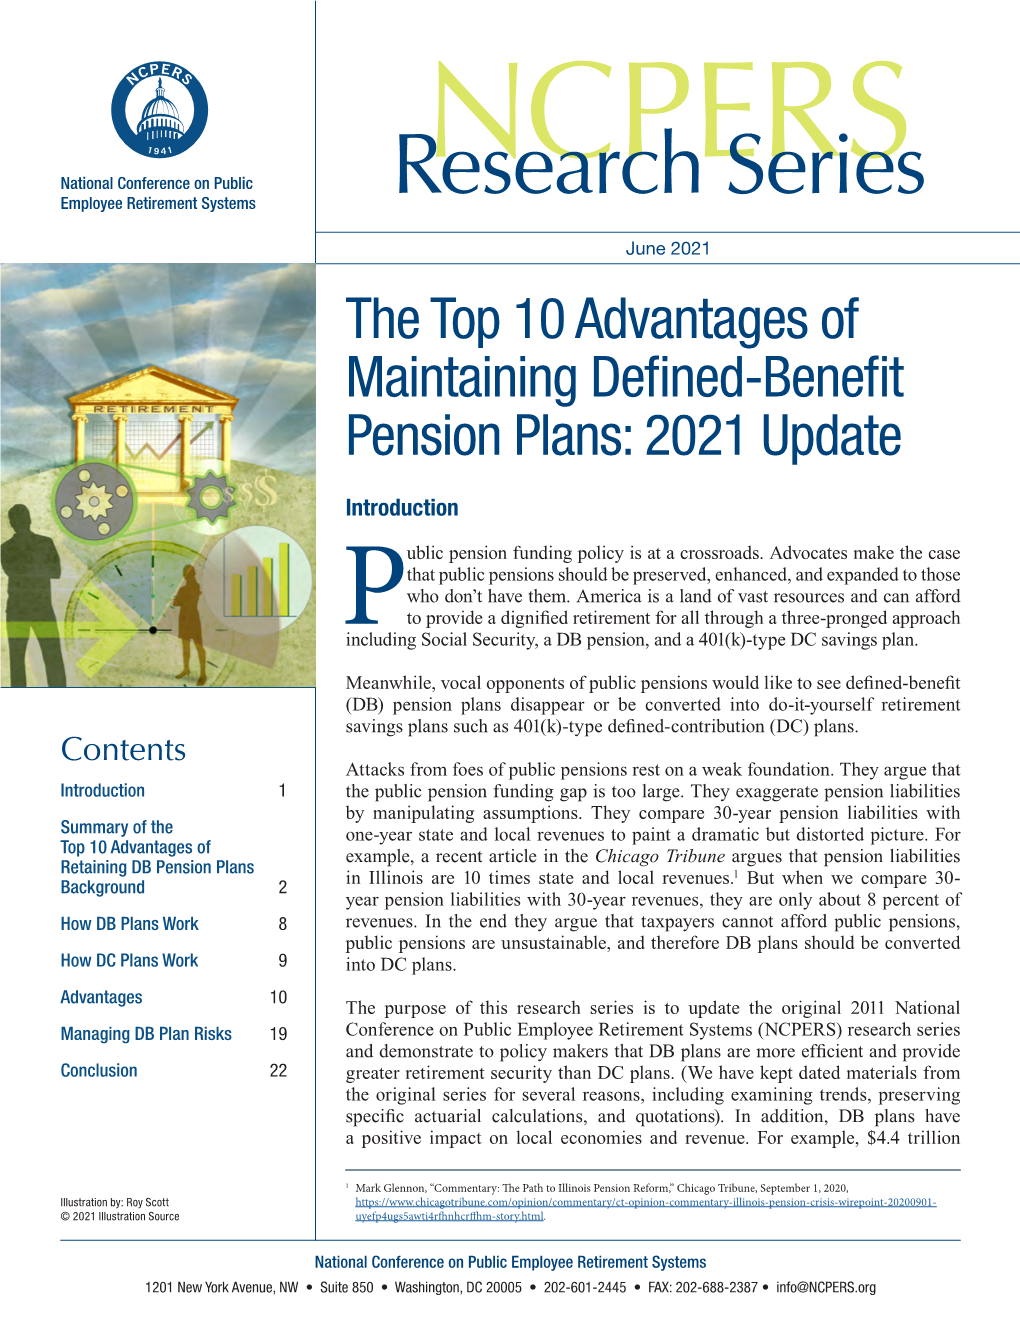 The Top 10 Advantages of Maintaining Defined-Benefit Pension Plans: 2021 Update